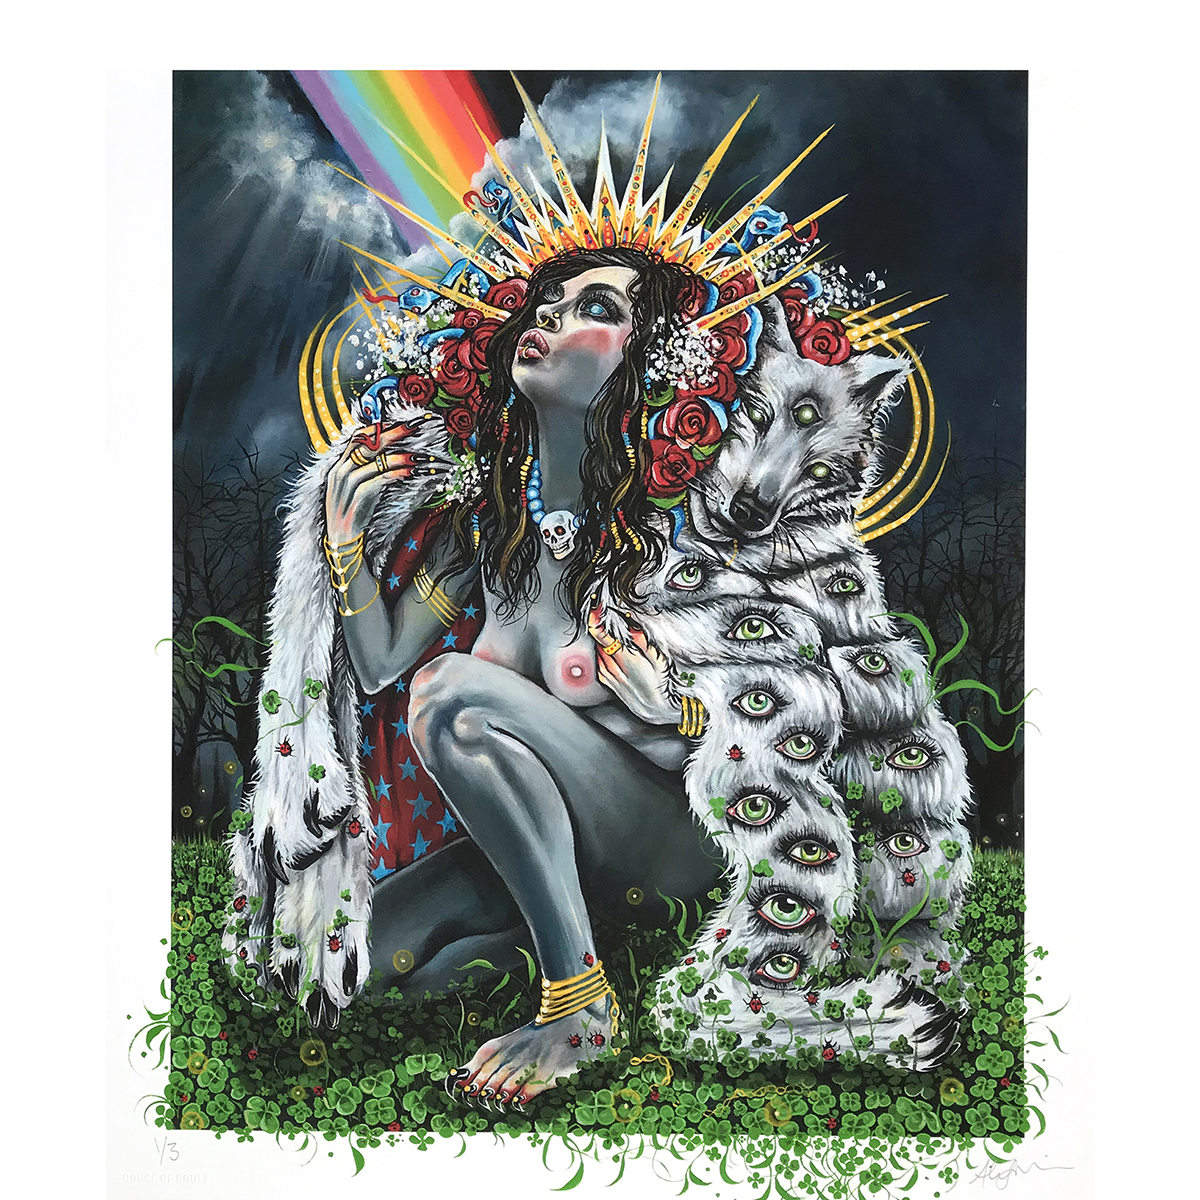 Alexis Price &quot;After the Storm&quot; - Hand-Embellished Variant, 1 of 3 - 14 x 17&quot;